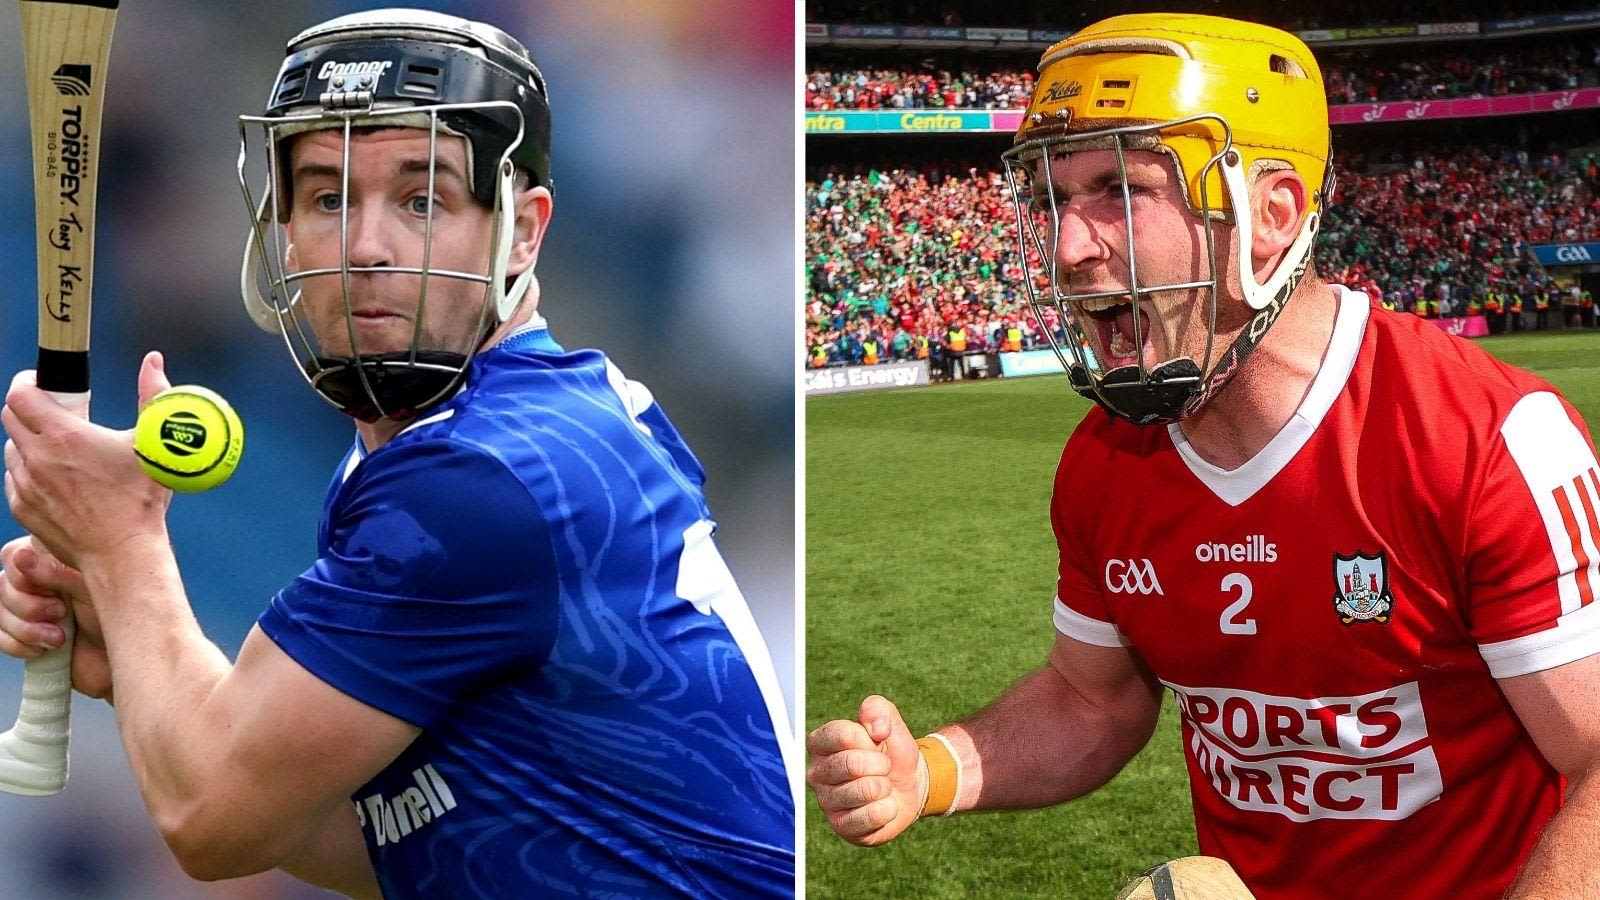 All-Ireland hurling final - all you need to know